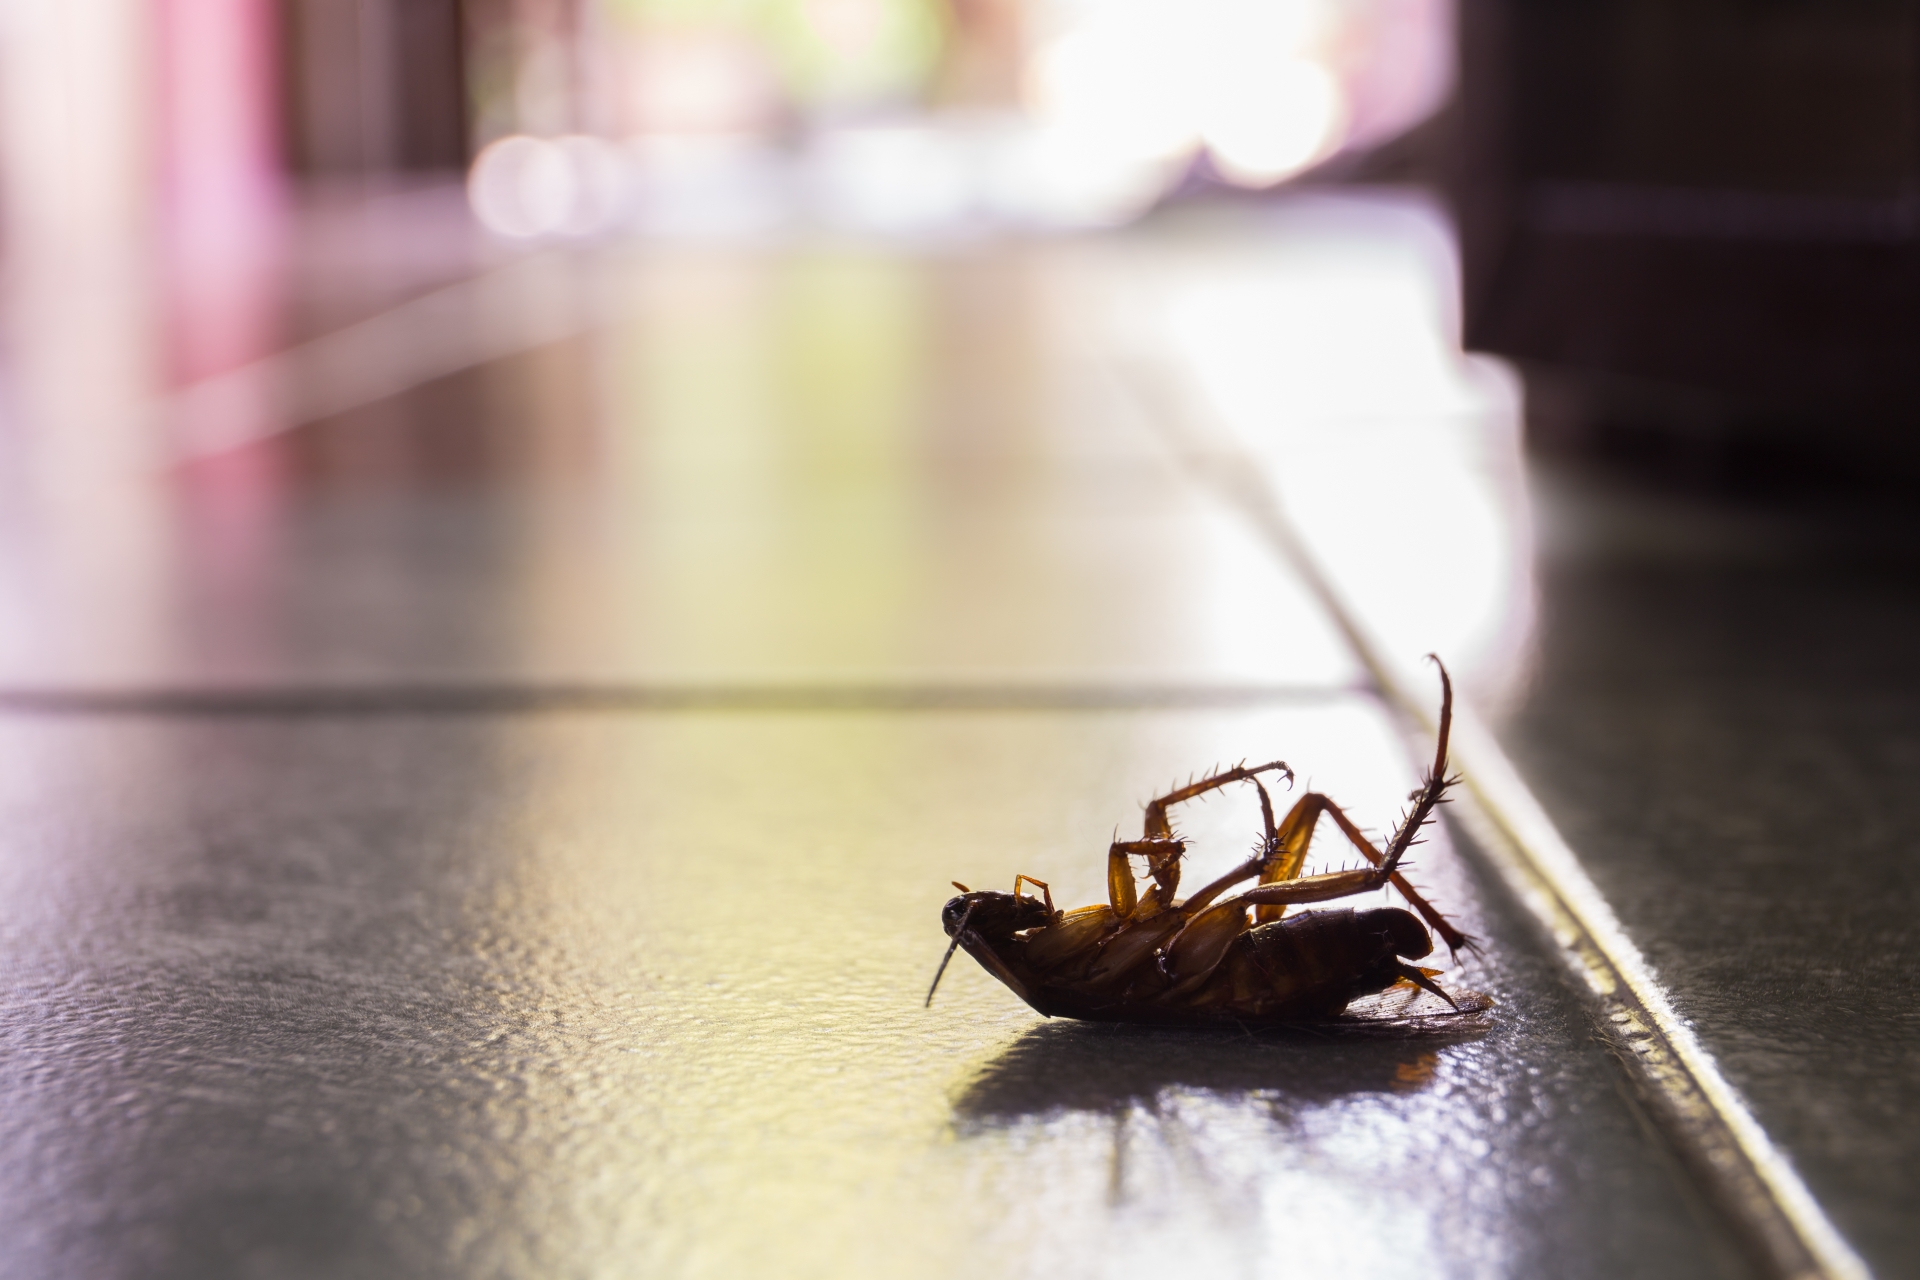 Cockroach Control, Pest Control in Ewell, Stoneleigh, KT17. Call Now 020 8166 9746